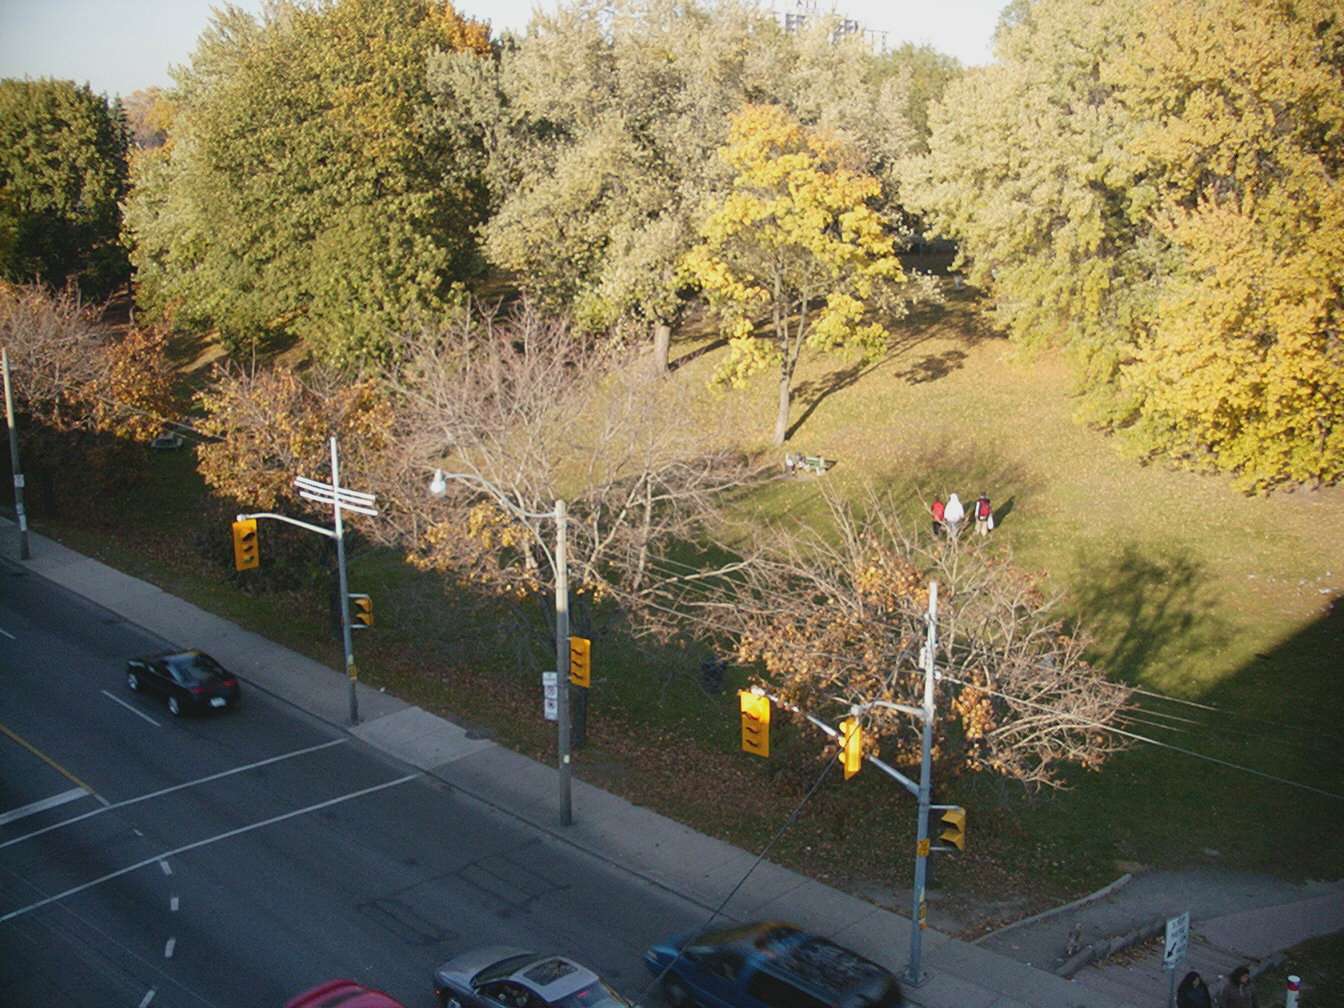 Dufferin Grove Community Project: a Park Within a Park